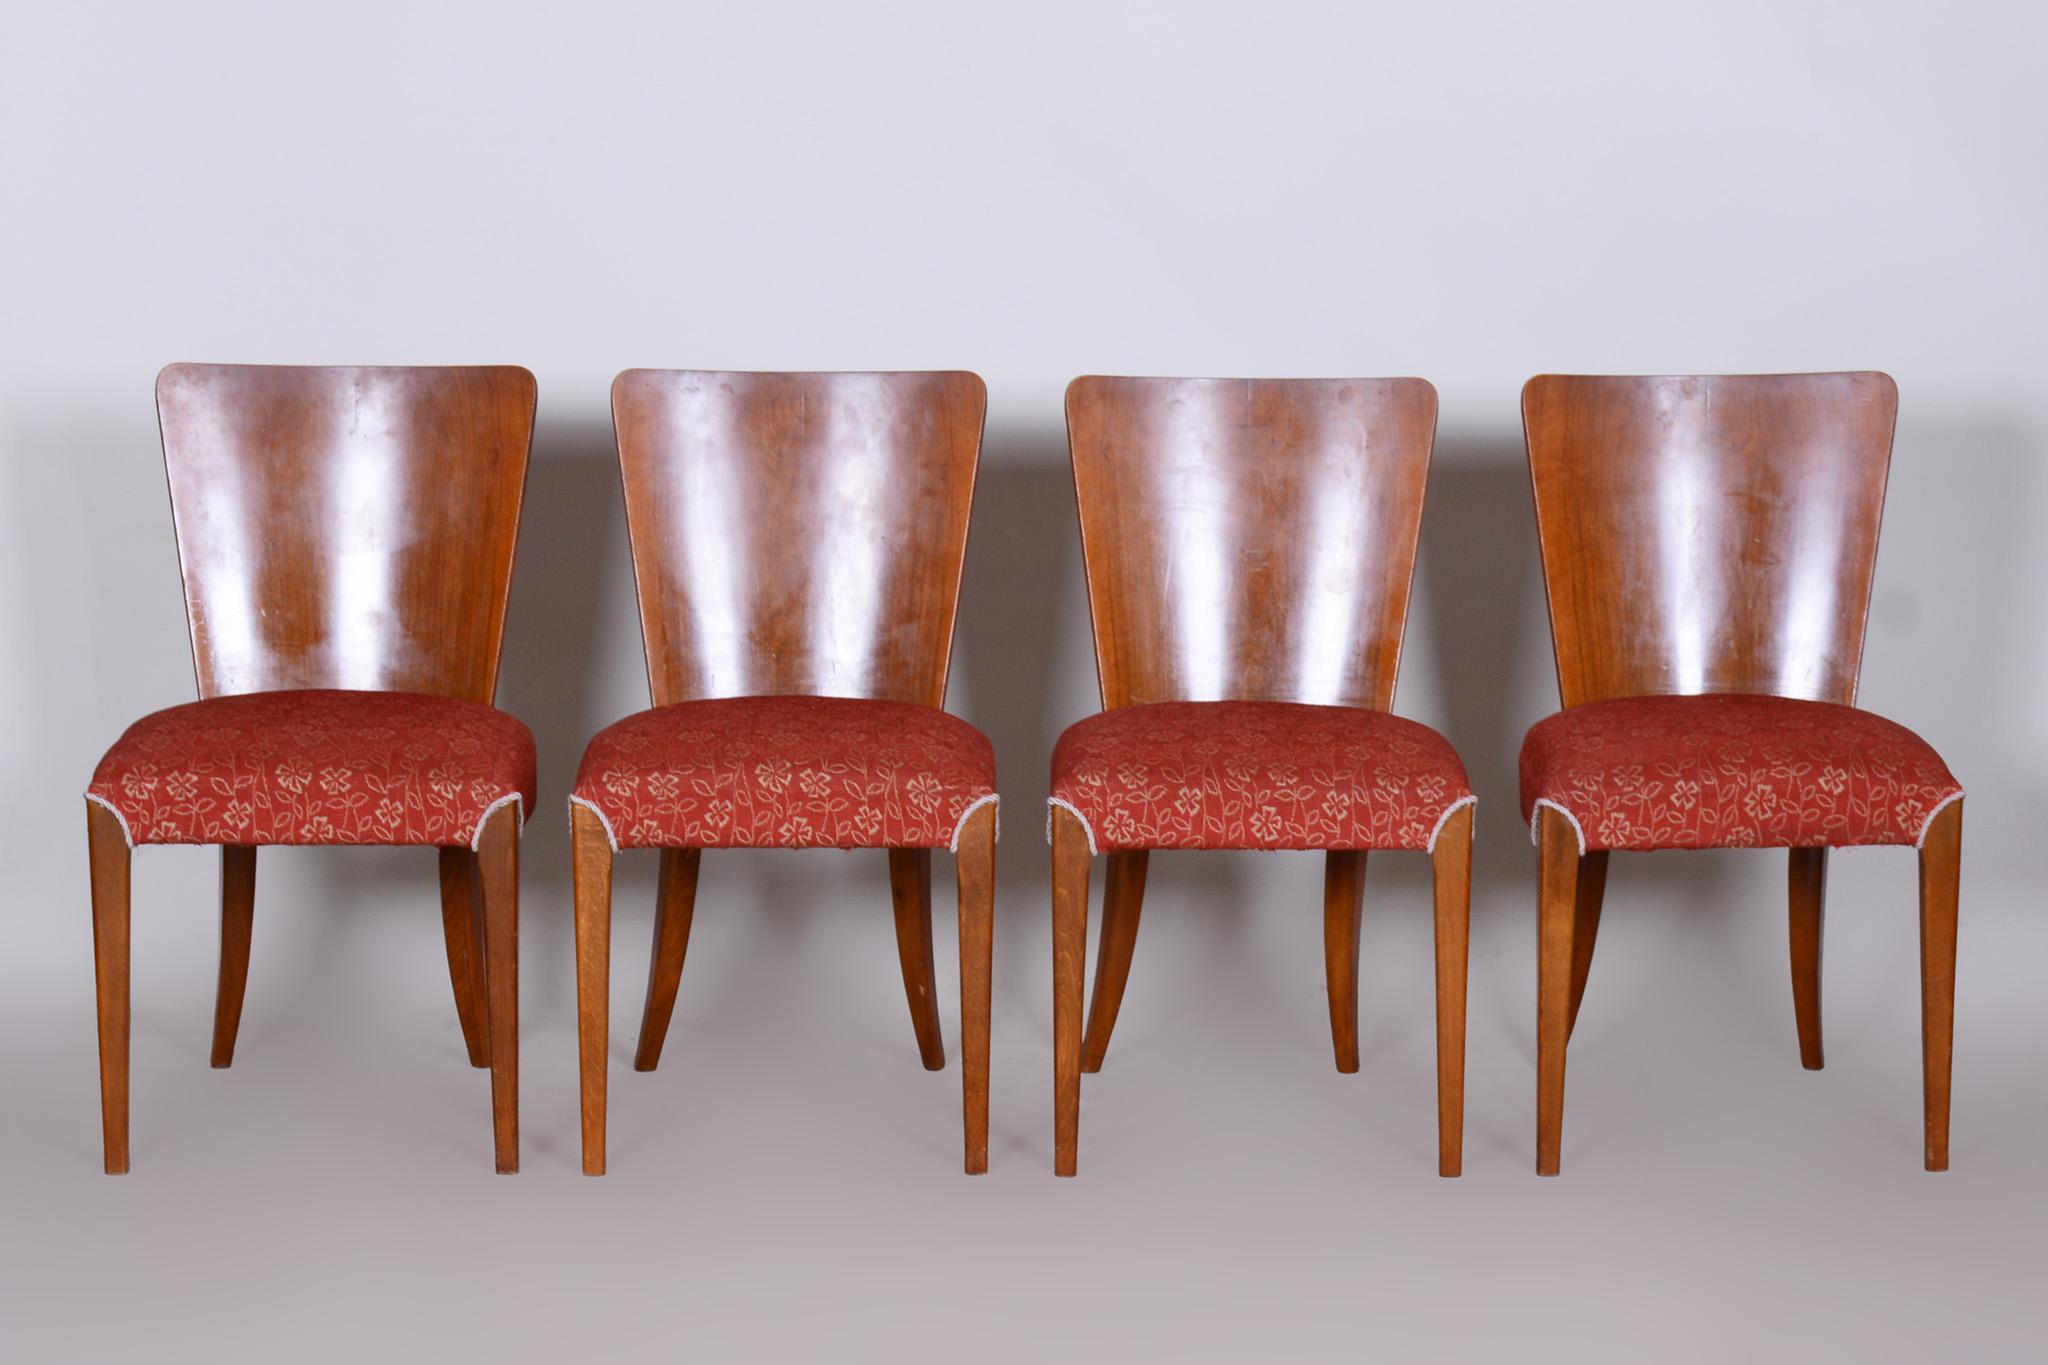 Czech Art Deco chairs, 4 pieces.
Material: Combination of beech and walnut veneer.
Period: 1940-1949

Well preserved original condition
Stable construction
Refreshed polish
Professionally cleaned upholstery

Made by architect Jindrich